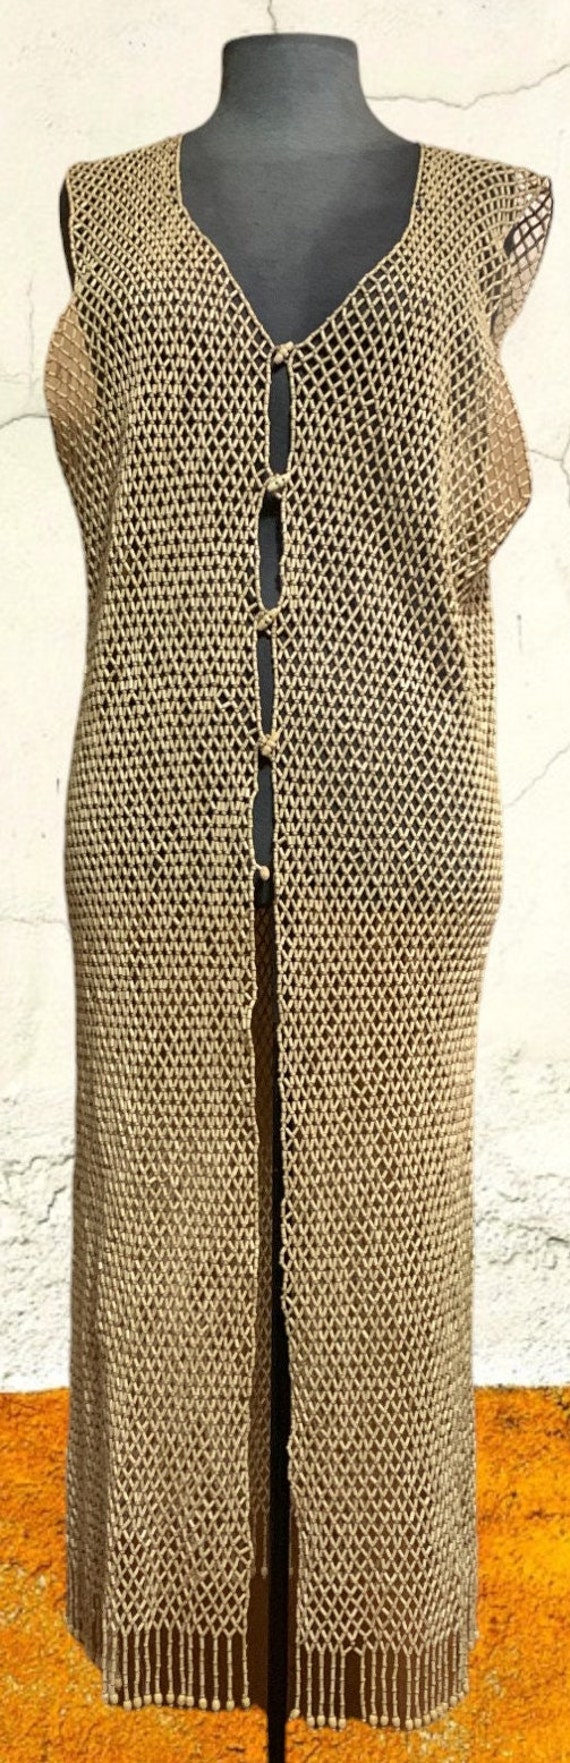 Wood Bead Duster Jacket, Beach Cover up - image 3